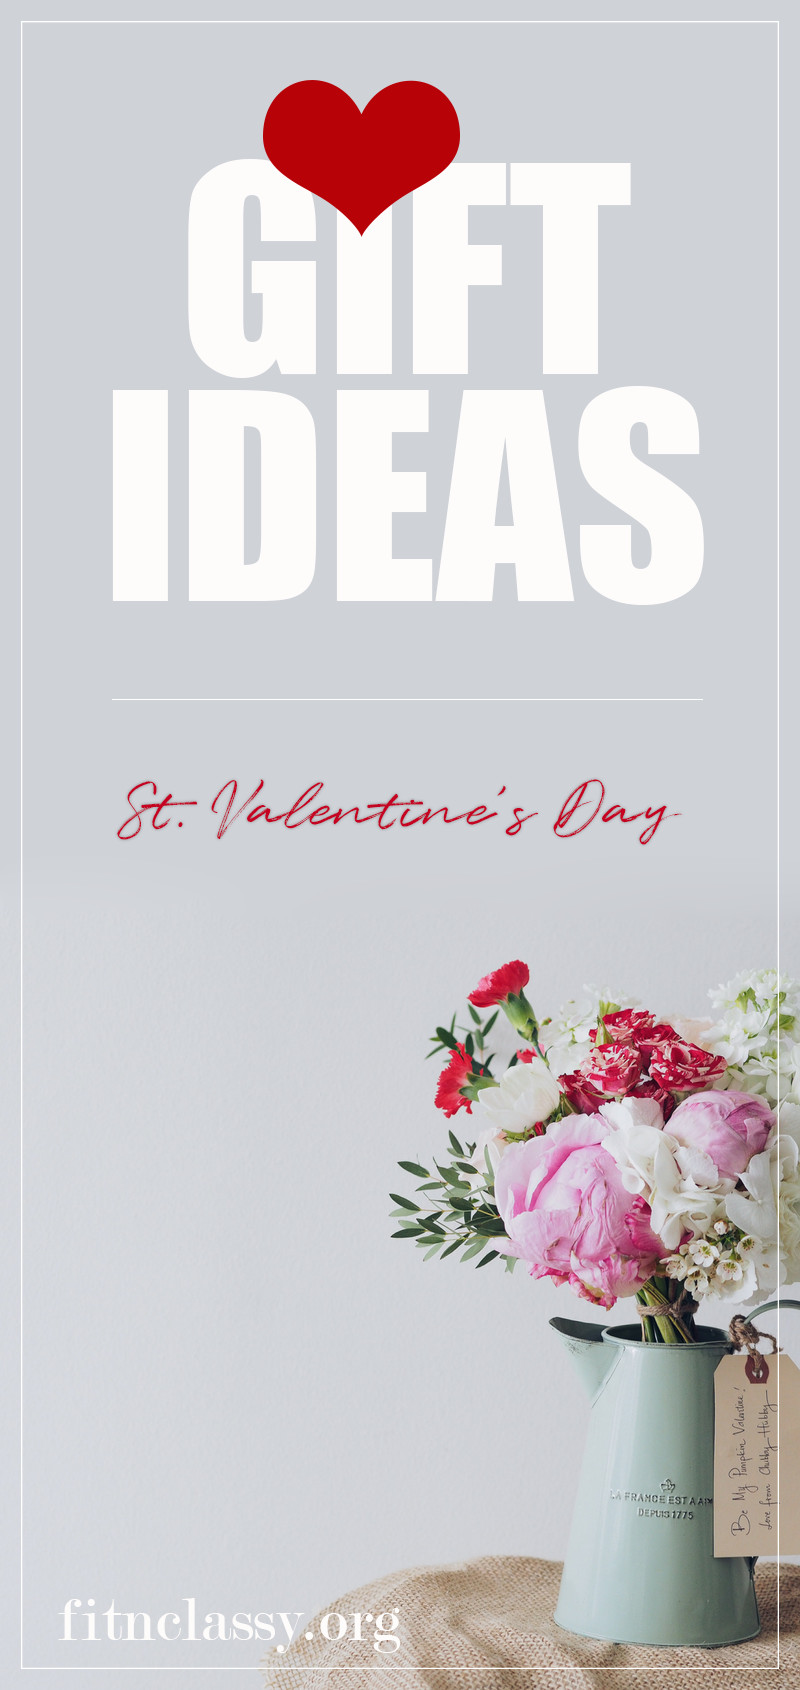 Saint Valentine Gift Ideas
 St Valentine s Day Gift Ideas For Couples Fit & Classy